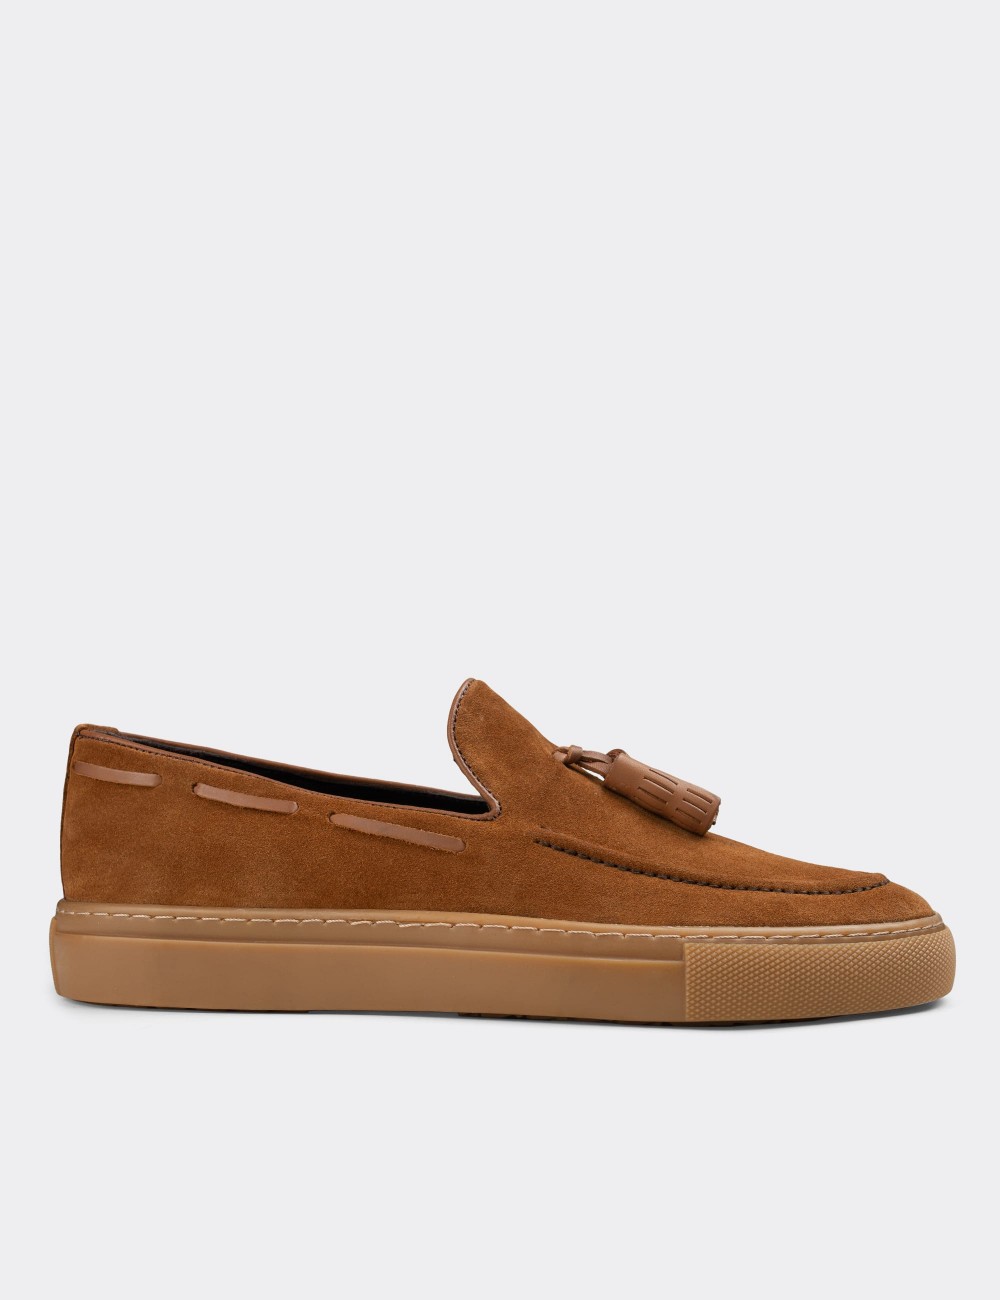 Tan Suede Leather Sneakers - 01836MTBAC01